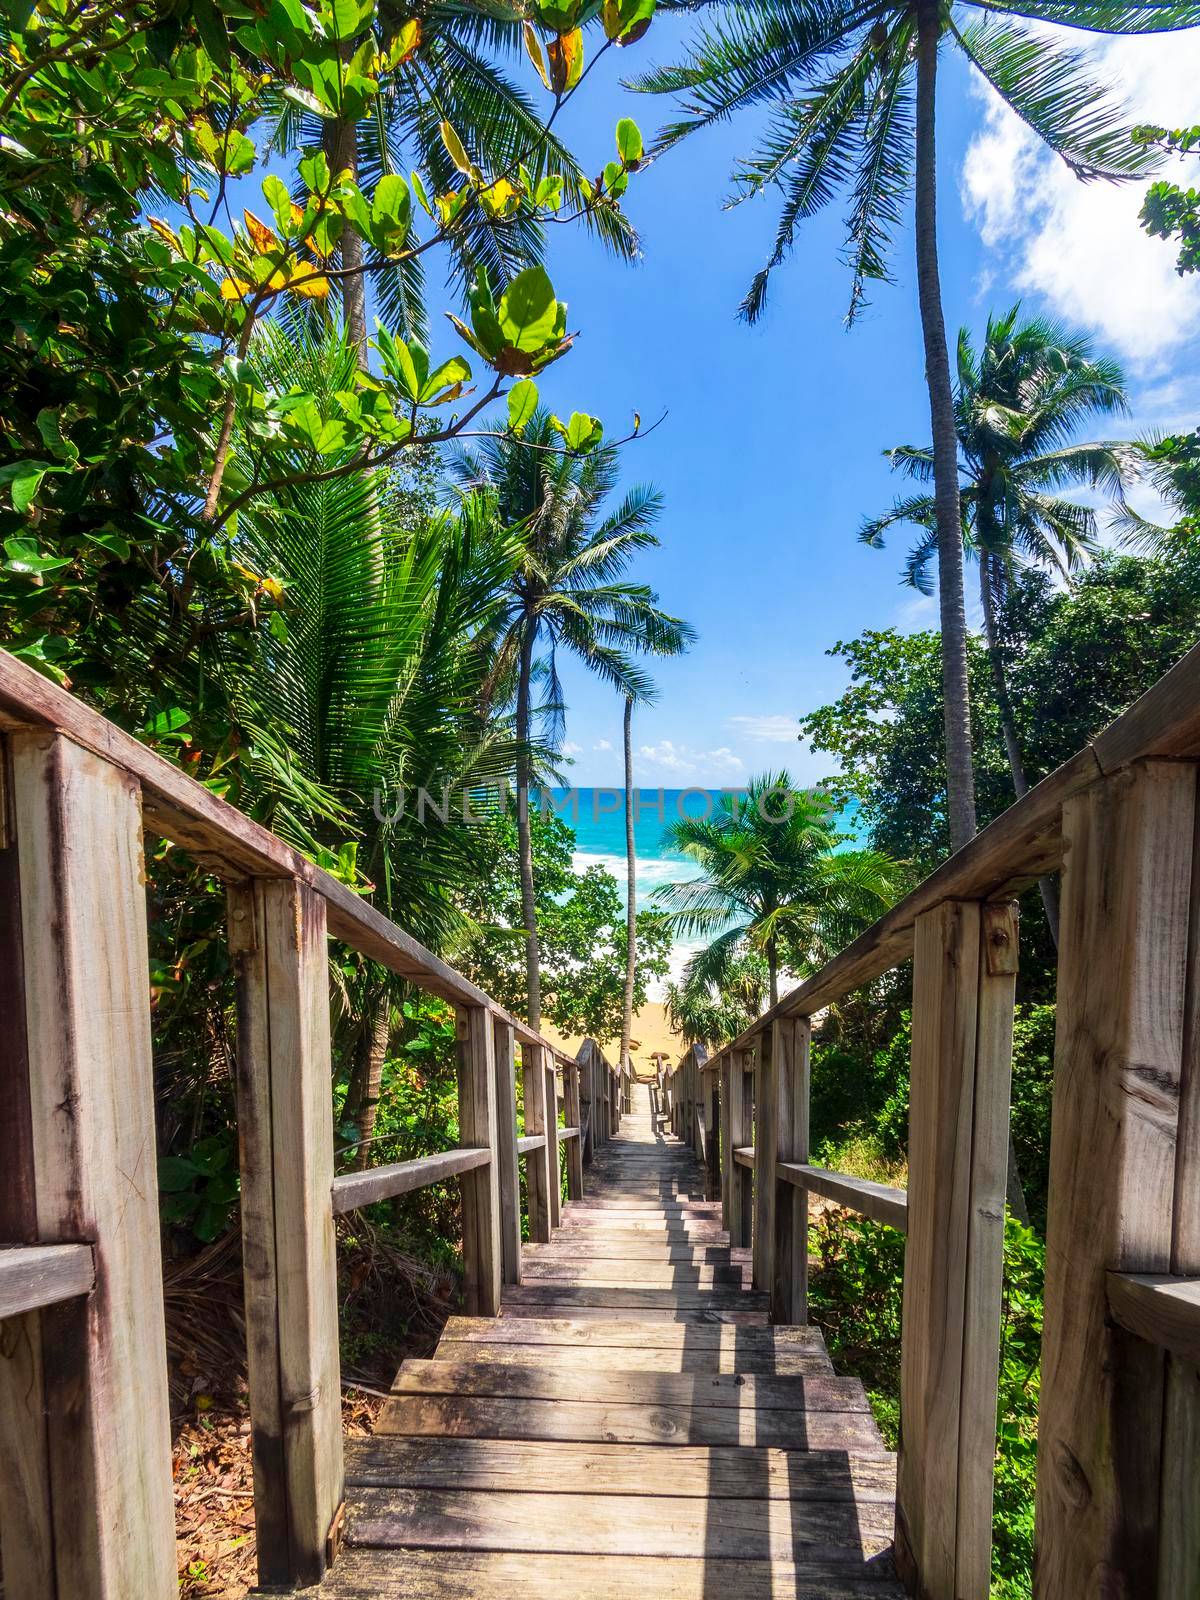 Wooden steps leading down to the beach. Wooden stairs down to the tropical beach. Phuket freedom beach Thailand. Summer day holiday vacation concept